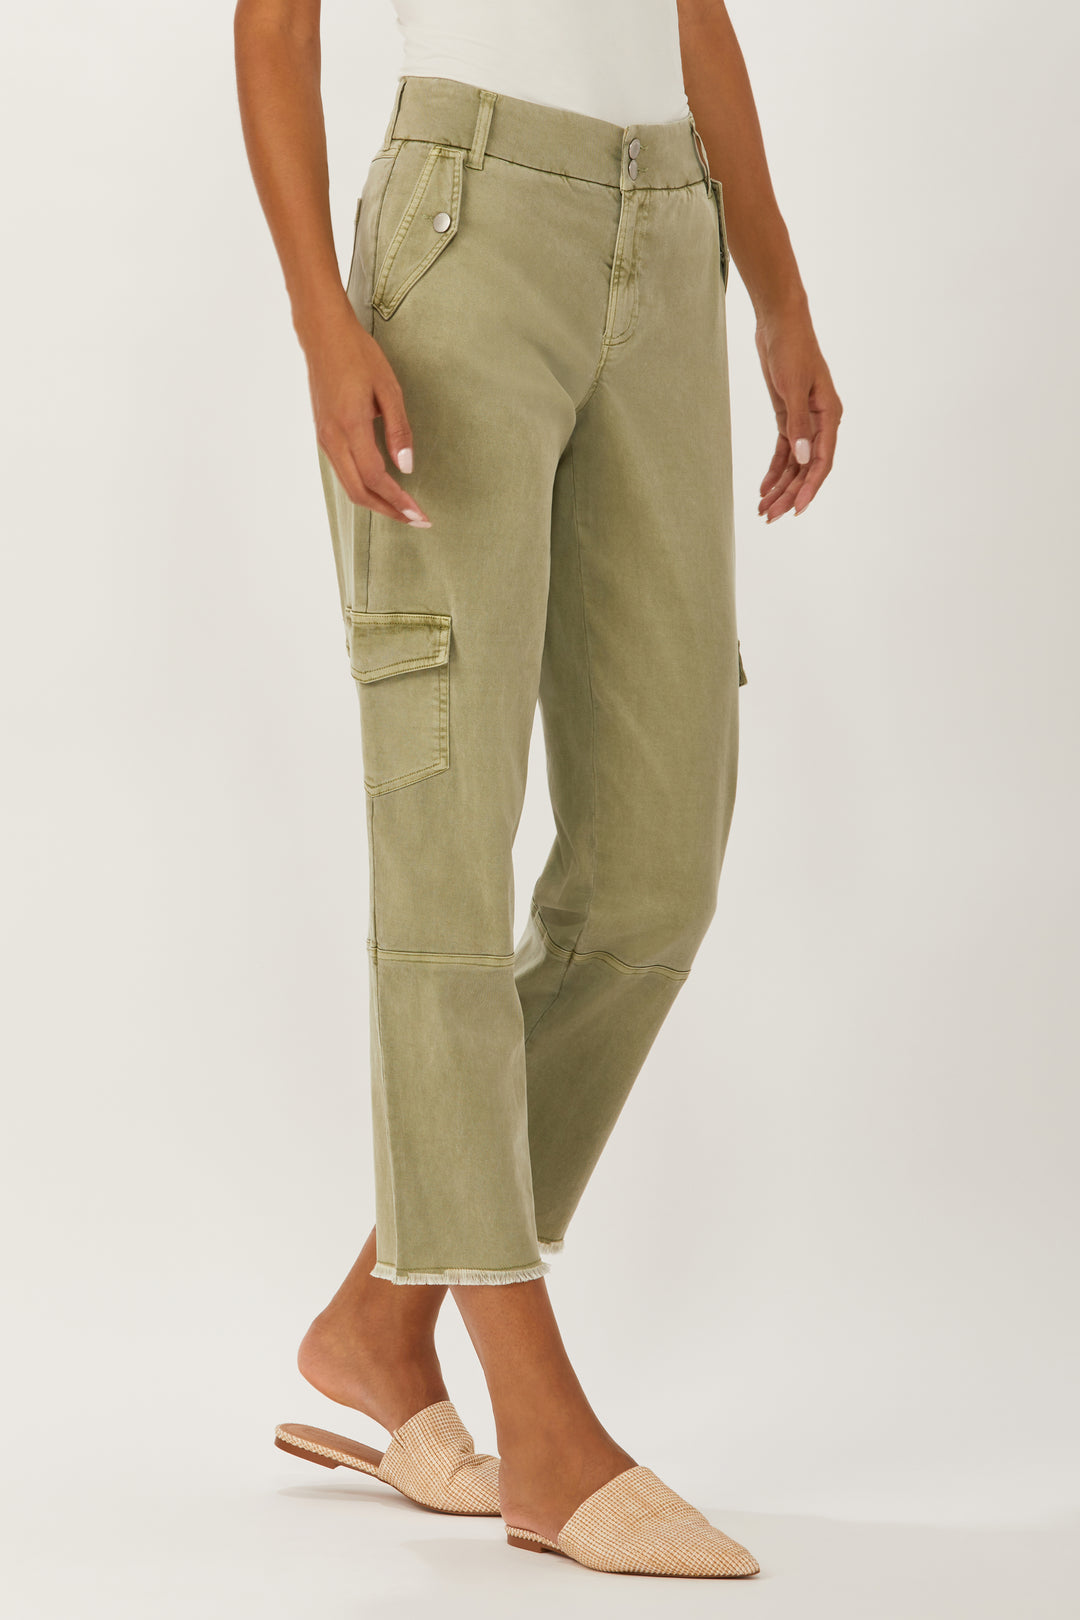 Crosby Utility Pant - Soft Olive